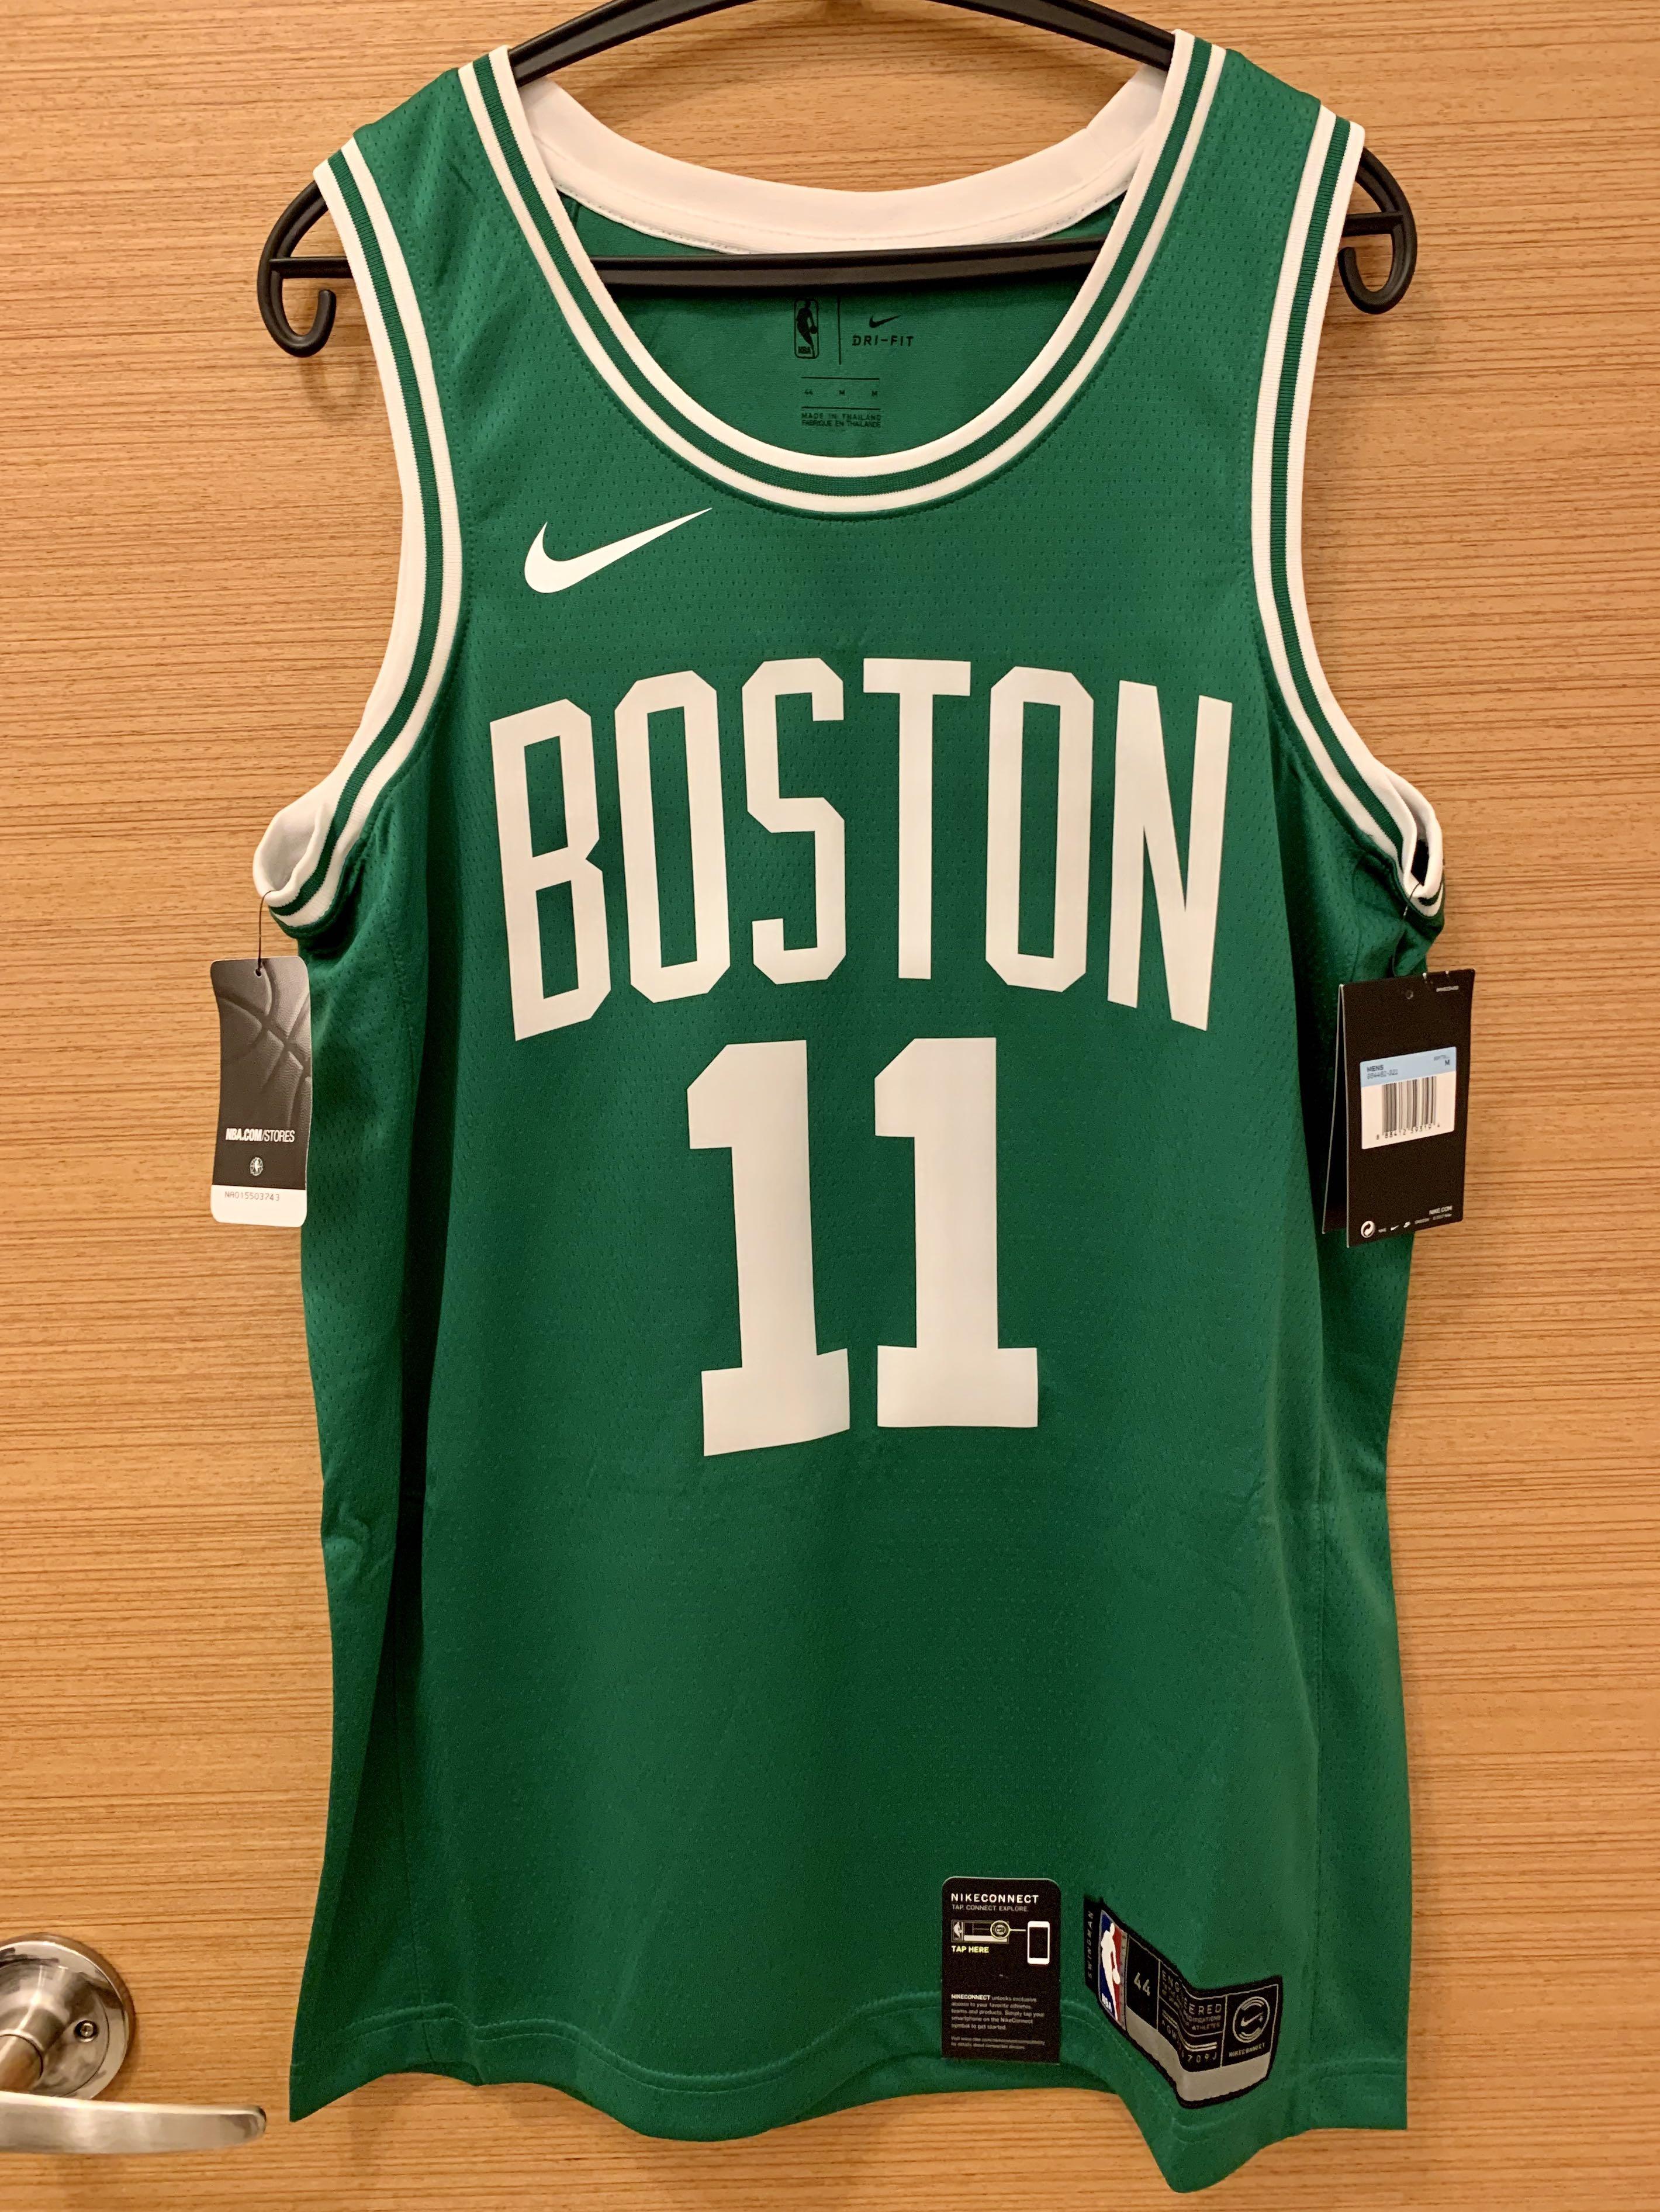 kyrie irving jersey green